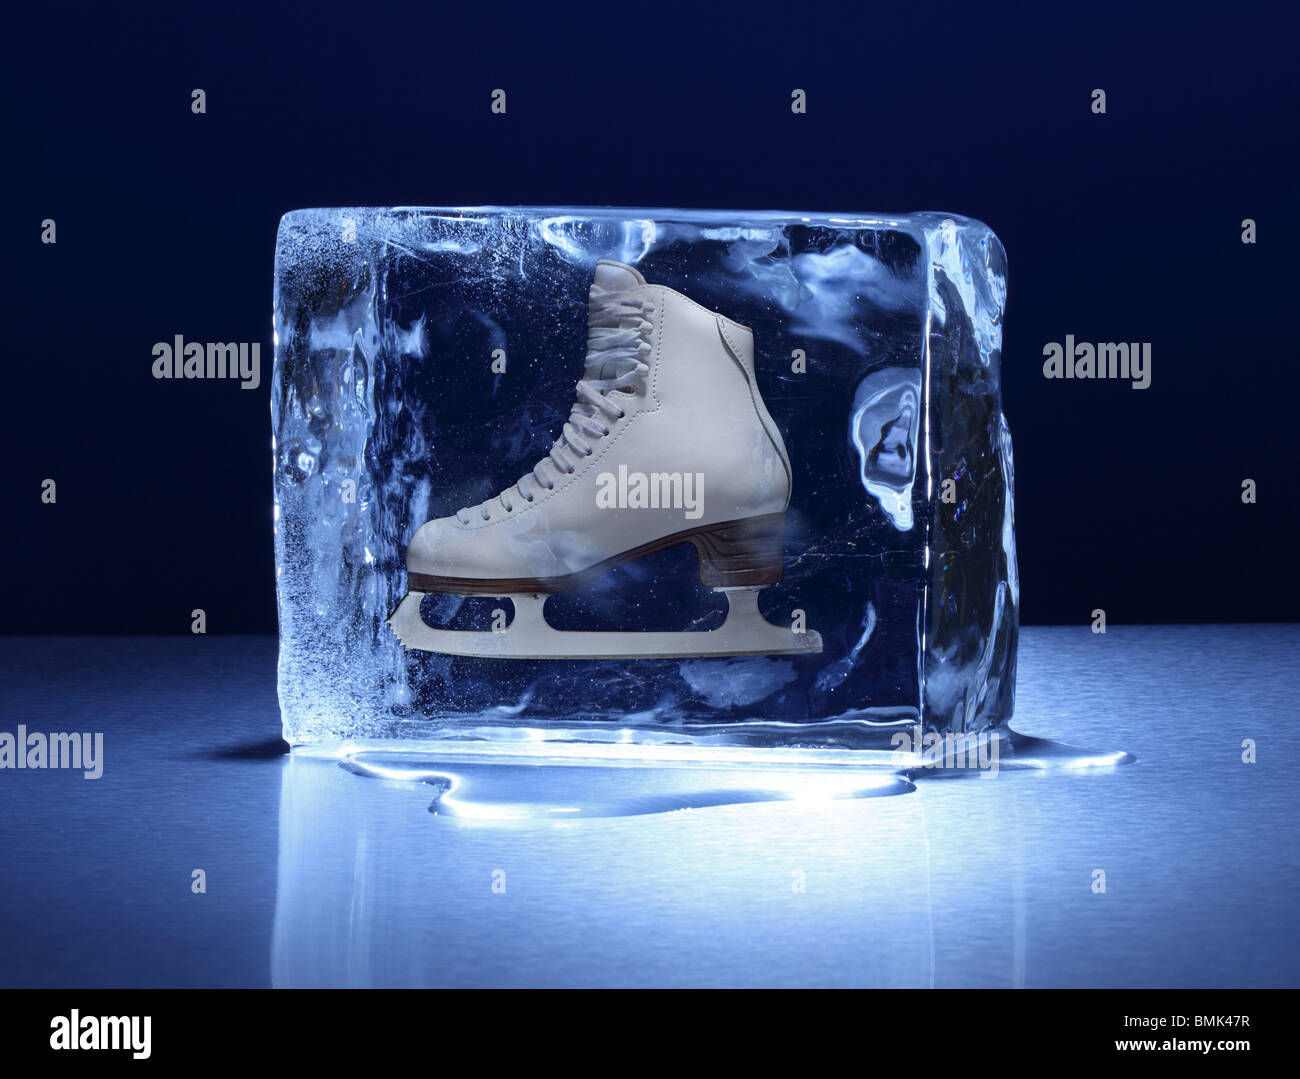 A frozen block of ice with a woman's figure skate frozen inside on a metal surface Stock Photo